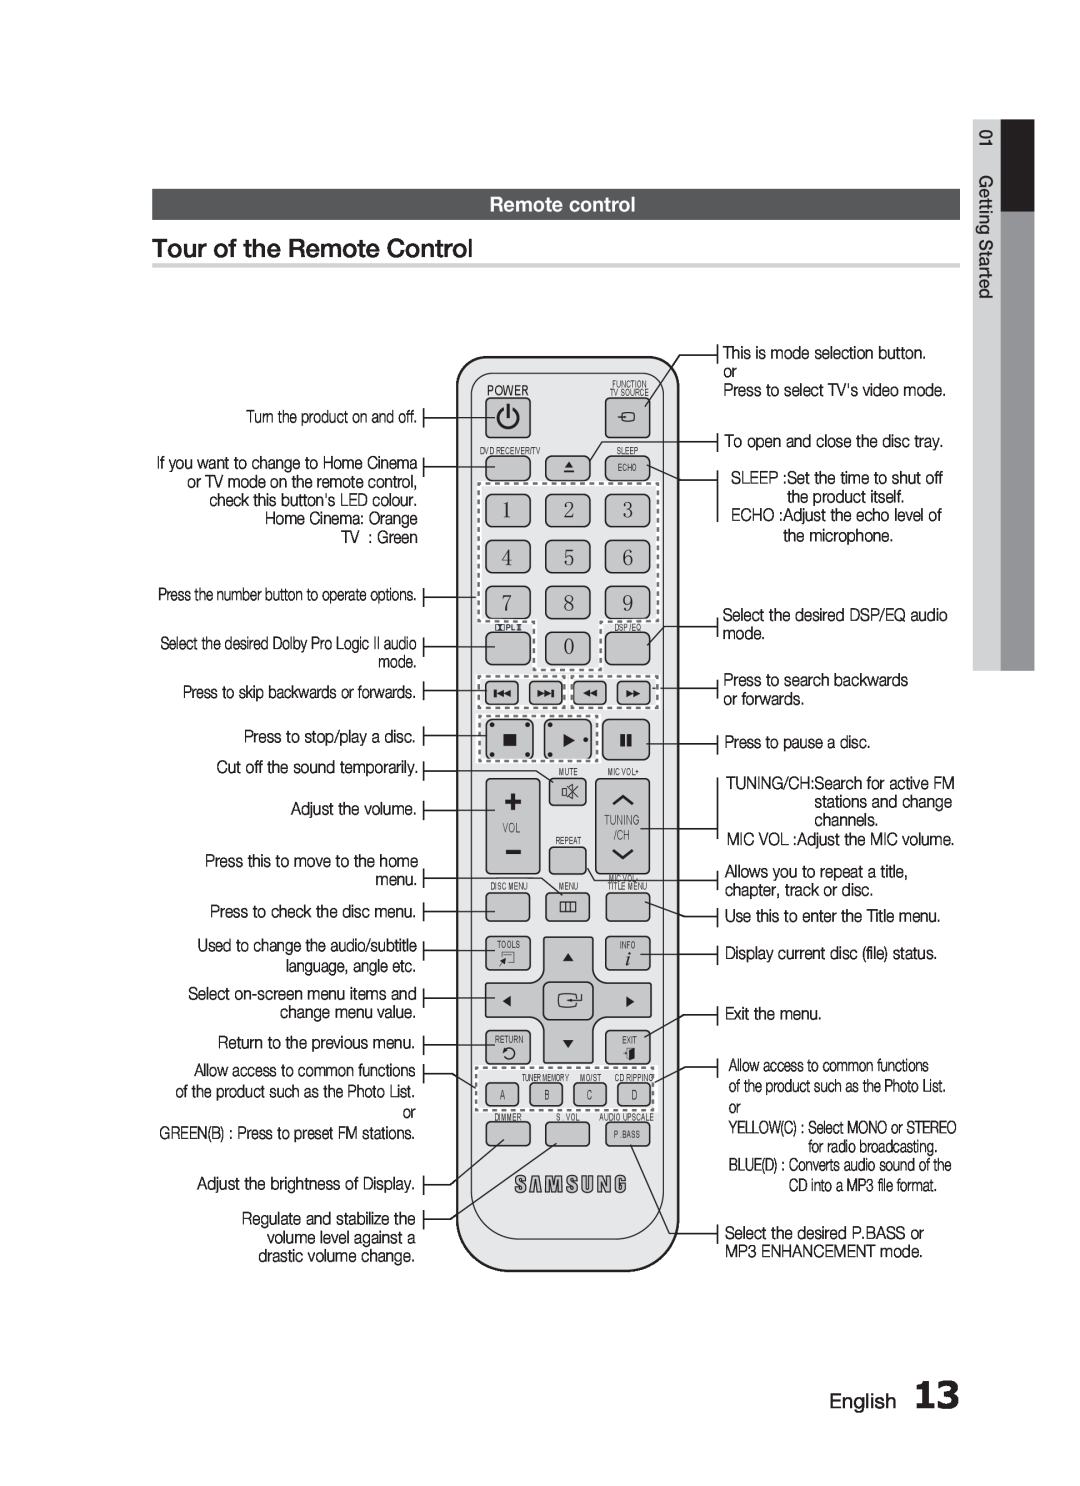 Samsung HT-C445N/MEA, HT-C453N/MEA, HT-C455N/MEA, HT-C455N/HAC manual Tour of the Remote Control, Remote control, English 